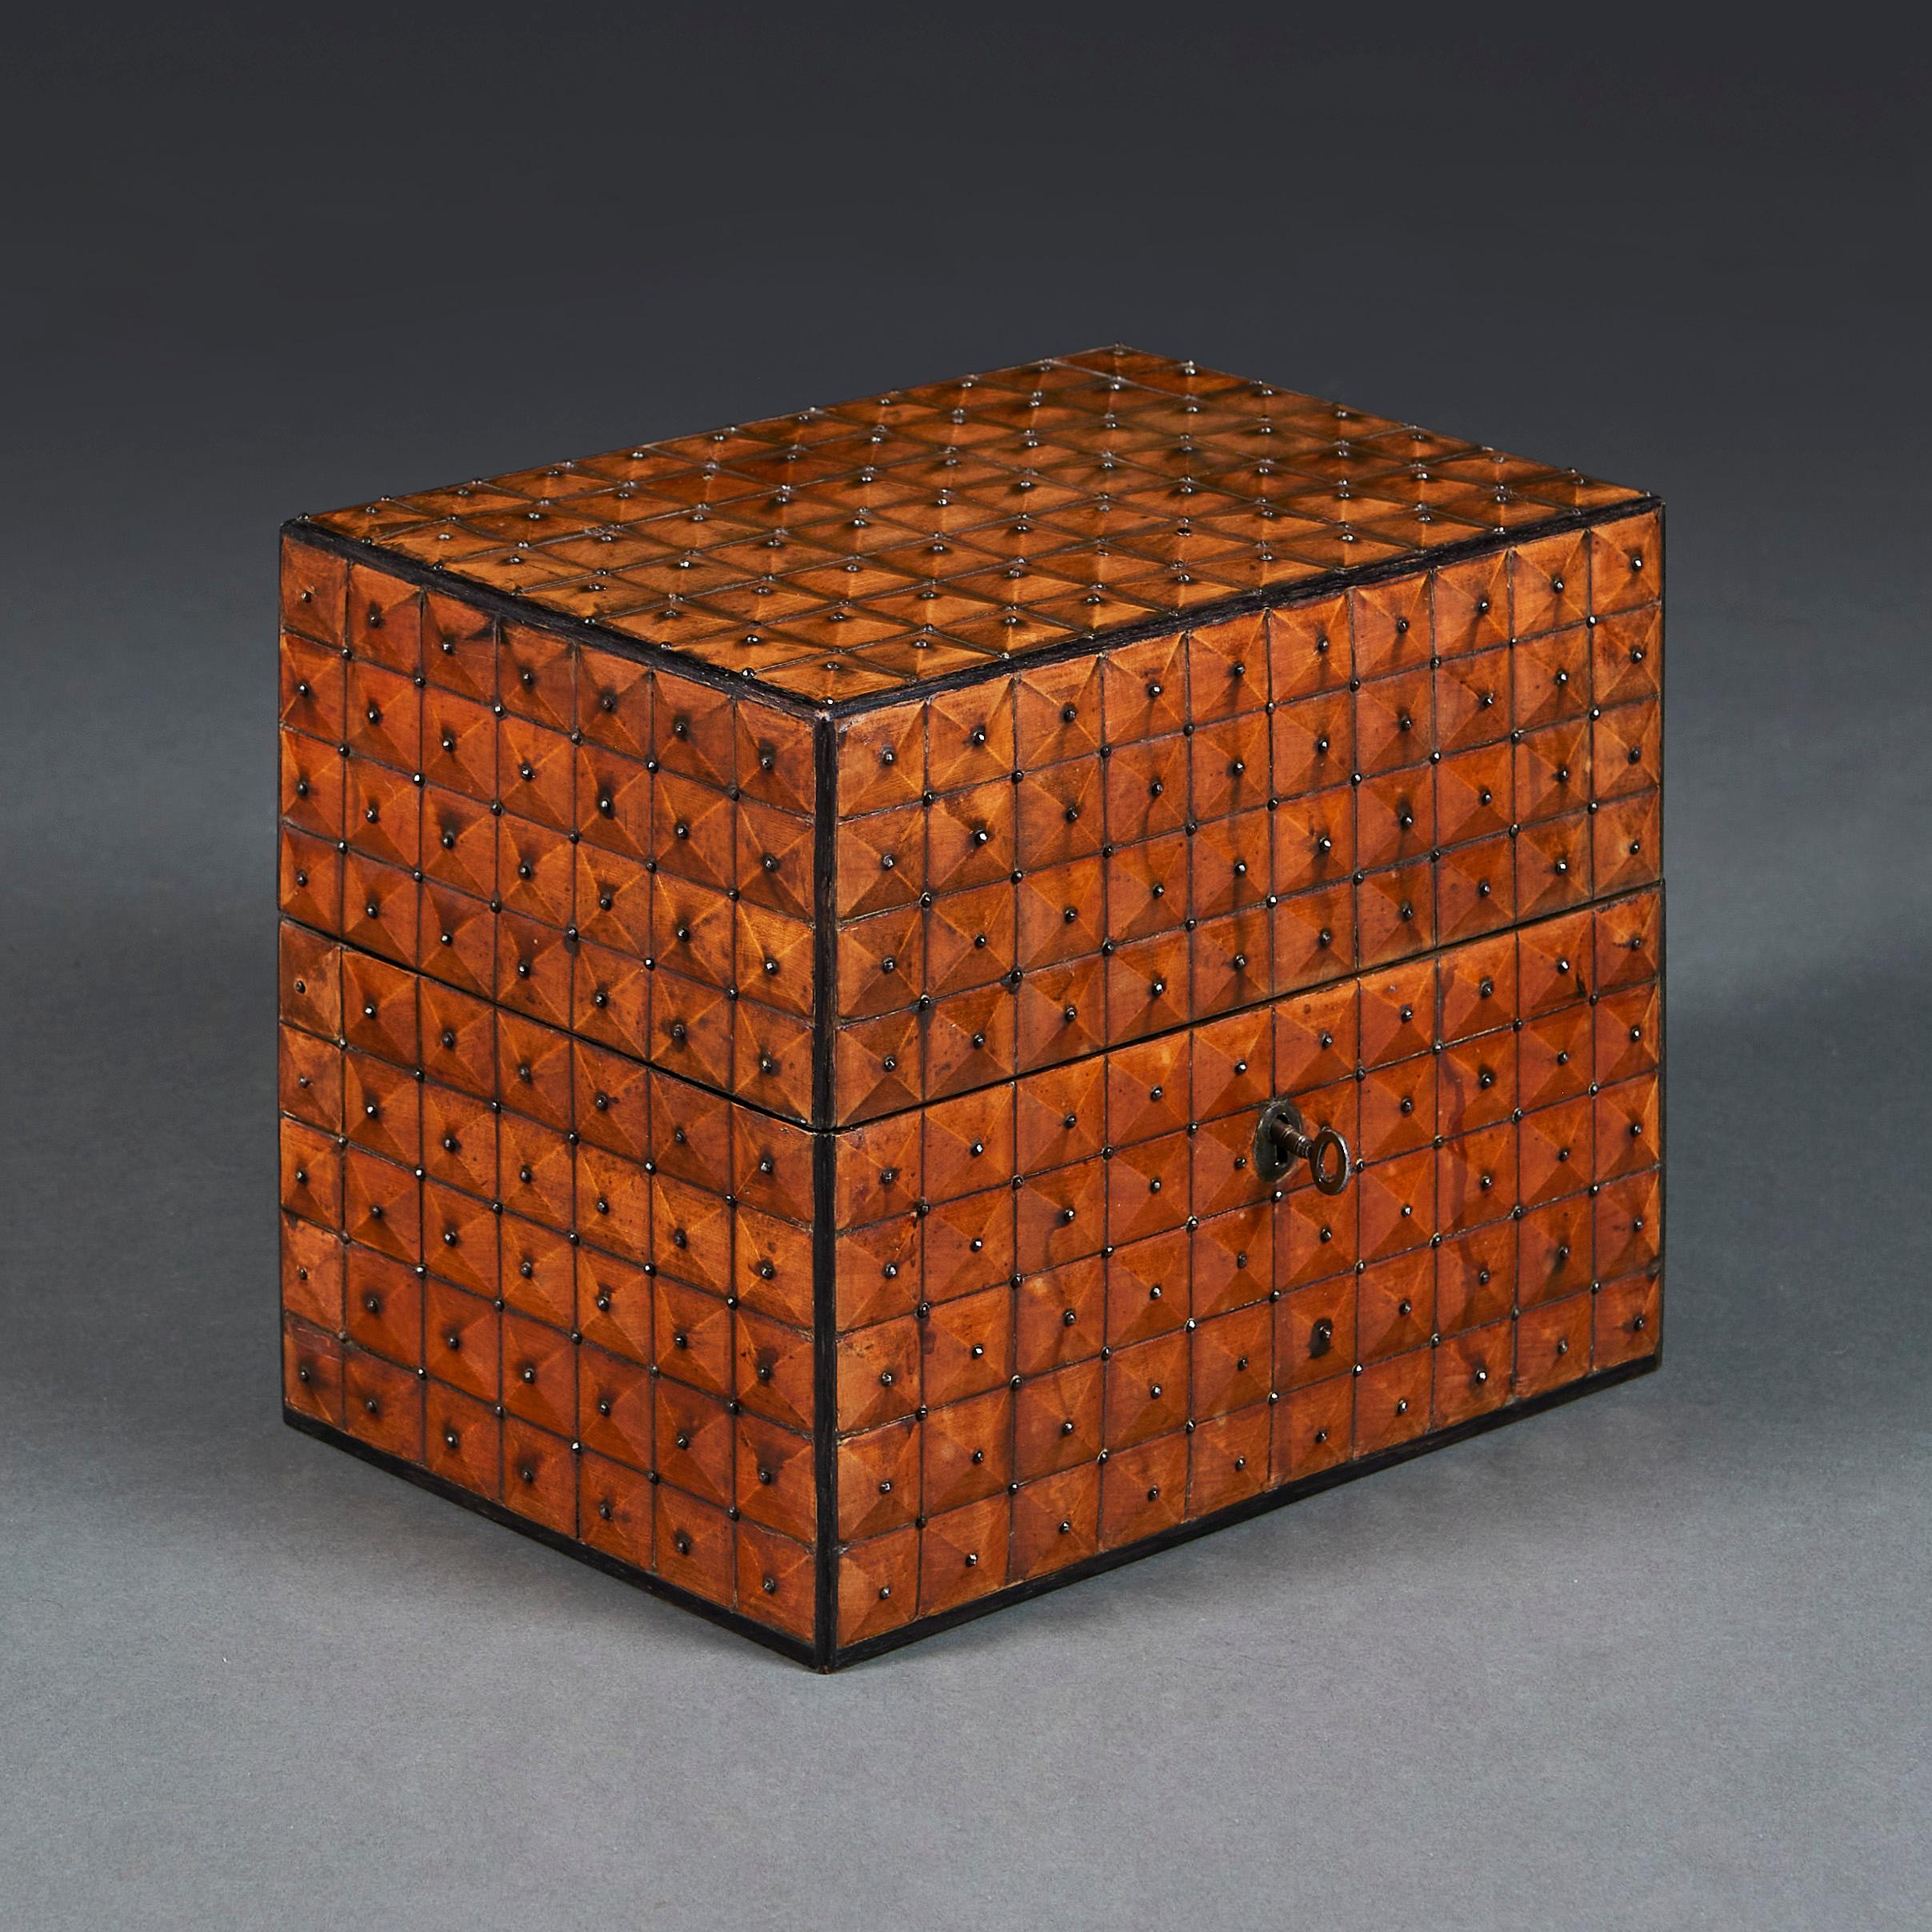 Austria, circa 1880

An unusual late nineteenth century Austrian fruitwood casket, with carved geometric pattern studded with iron pins, the interior lined with marbled paper.

Height 23.00cm
Width 28.50cm
Depth 19.50cm